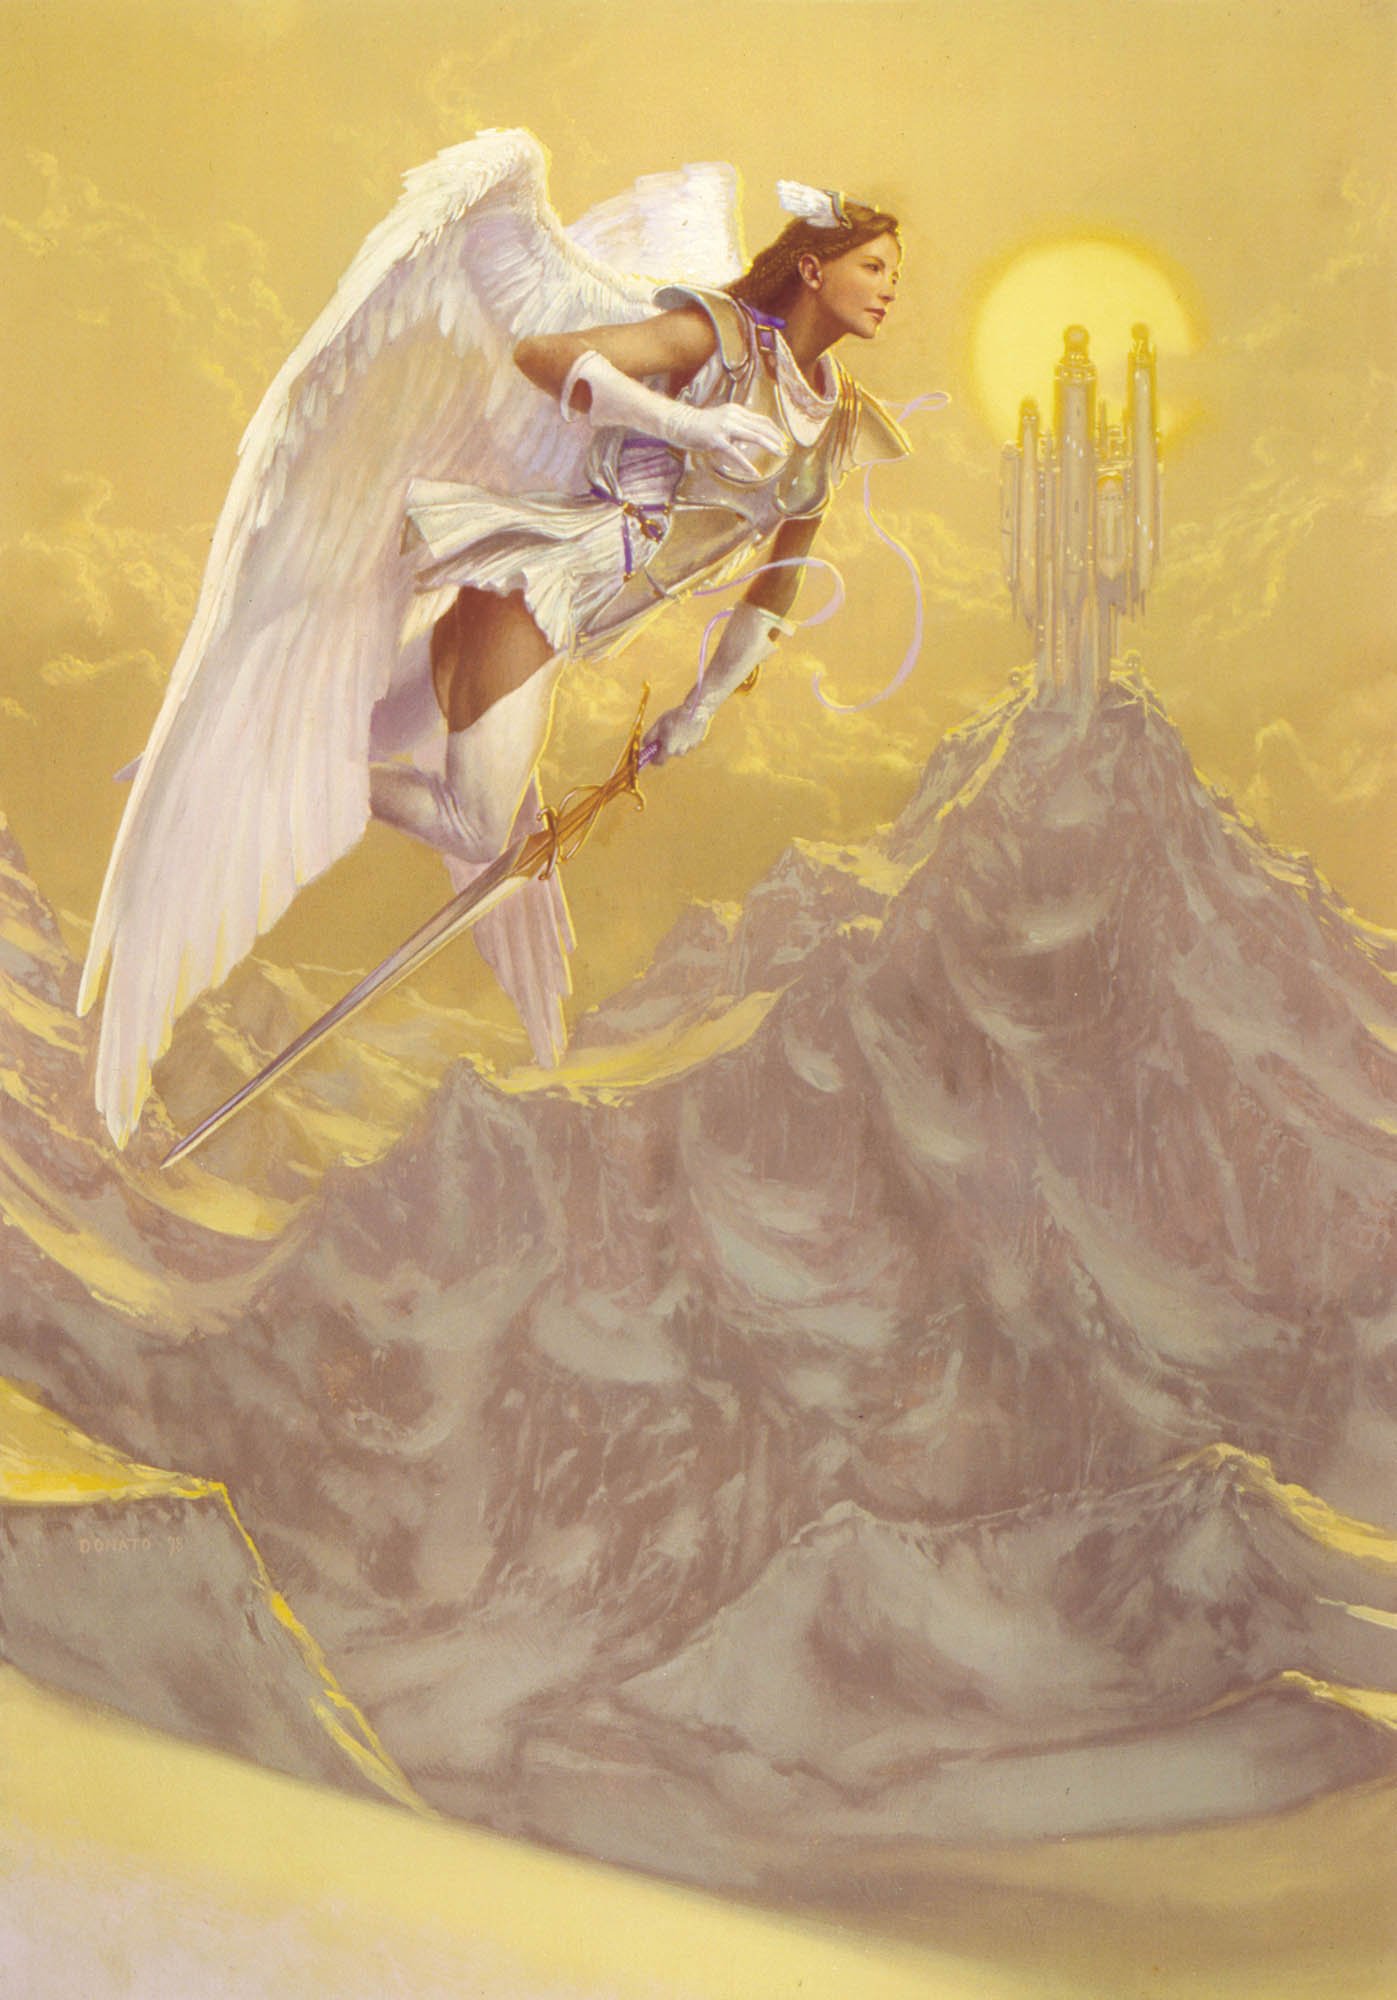 Archangel
Japanese Promotional Card
24" x 16"  Oil on Panel
private collection
prints available in the store